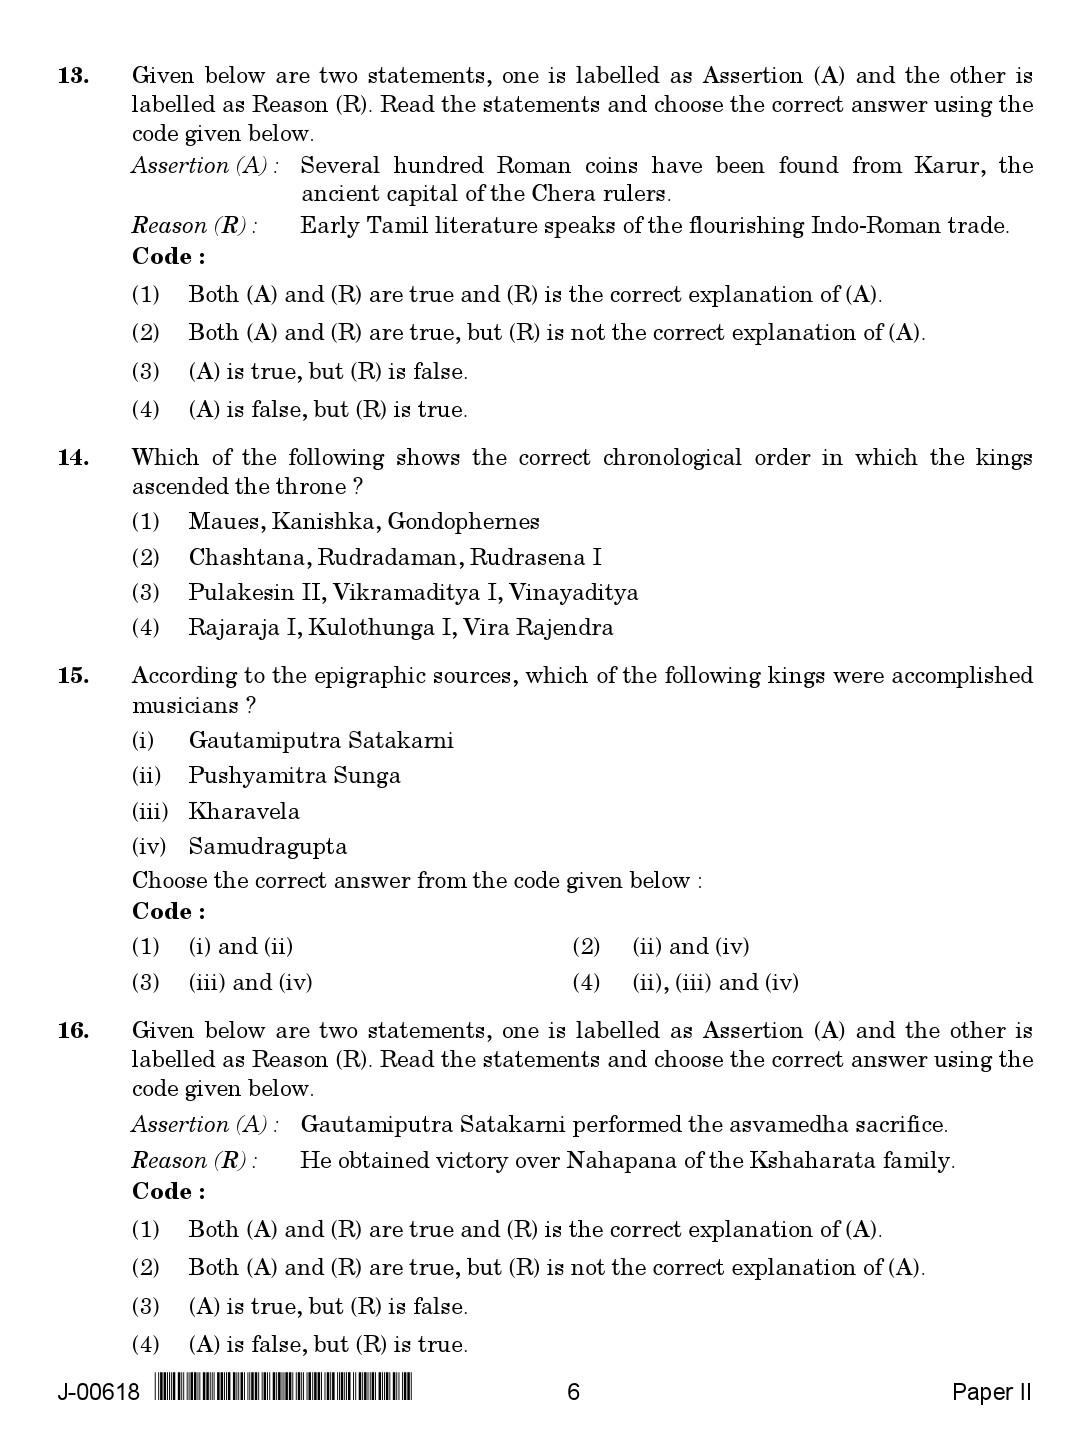 History Question Paper II July 2018 in English 2nd Exam 4